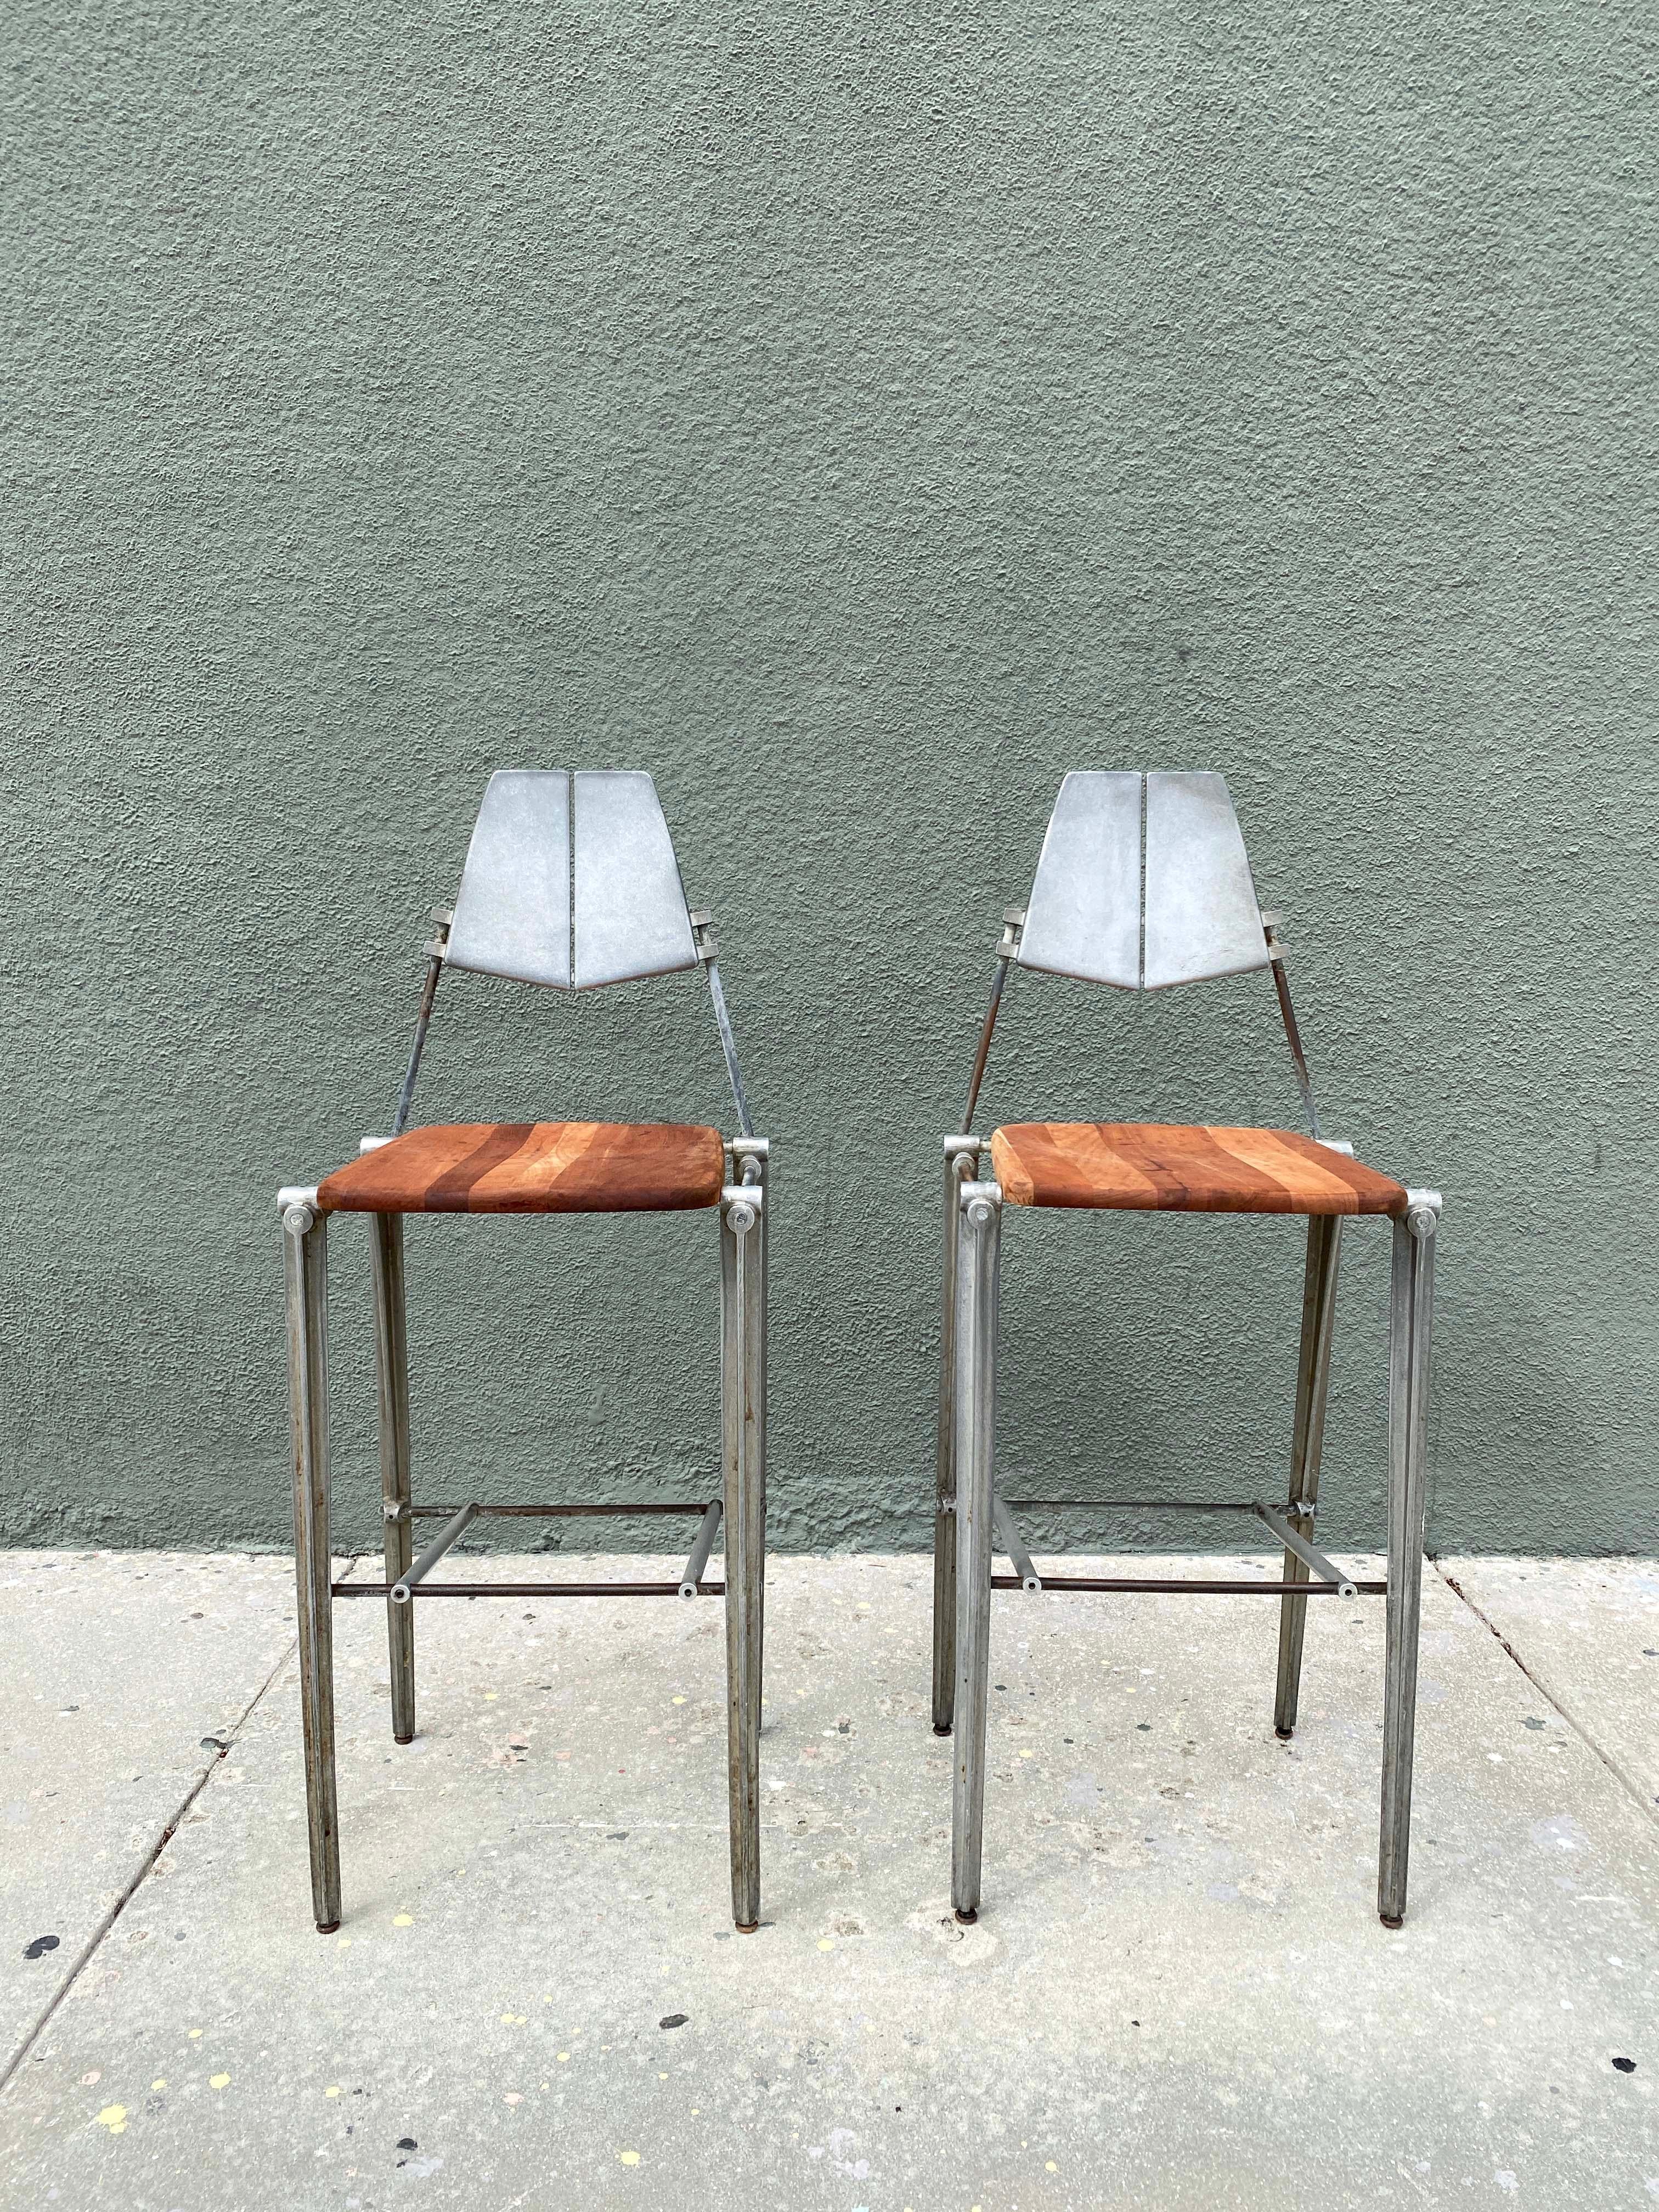 Designed by Robert Josten, these cast aluminum bar stools feature sculpted aluminum backs or frames along with a comfortably molded Teak wooden seat. Circa 1980s.

Measures: 47.5”H x 18.5”W x 18”D x 30.5”Seat H.